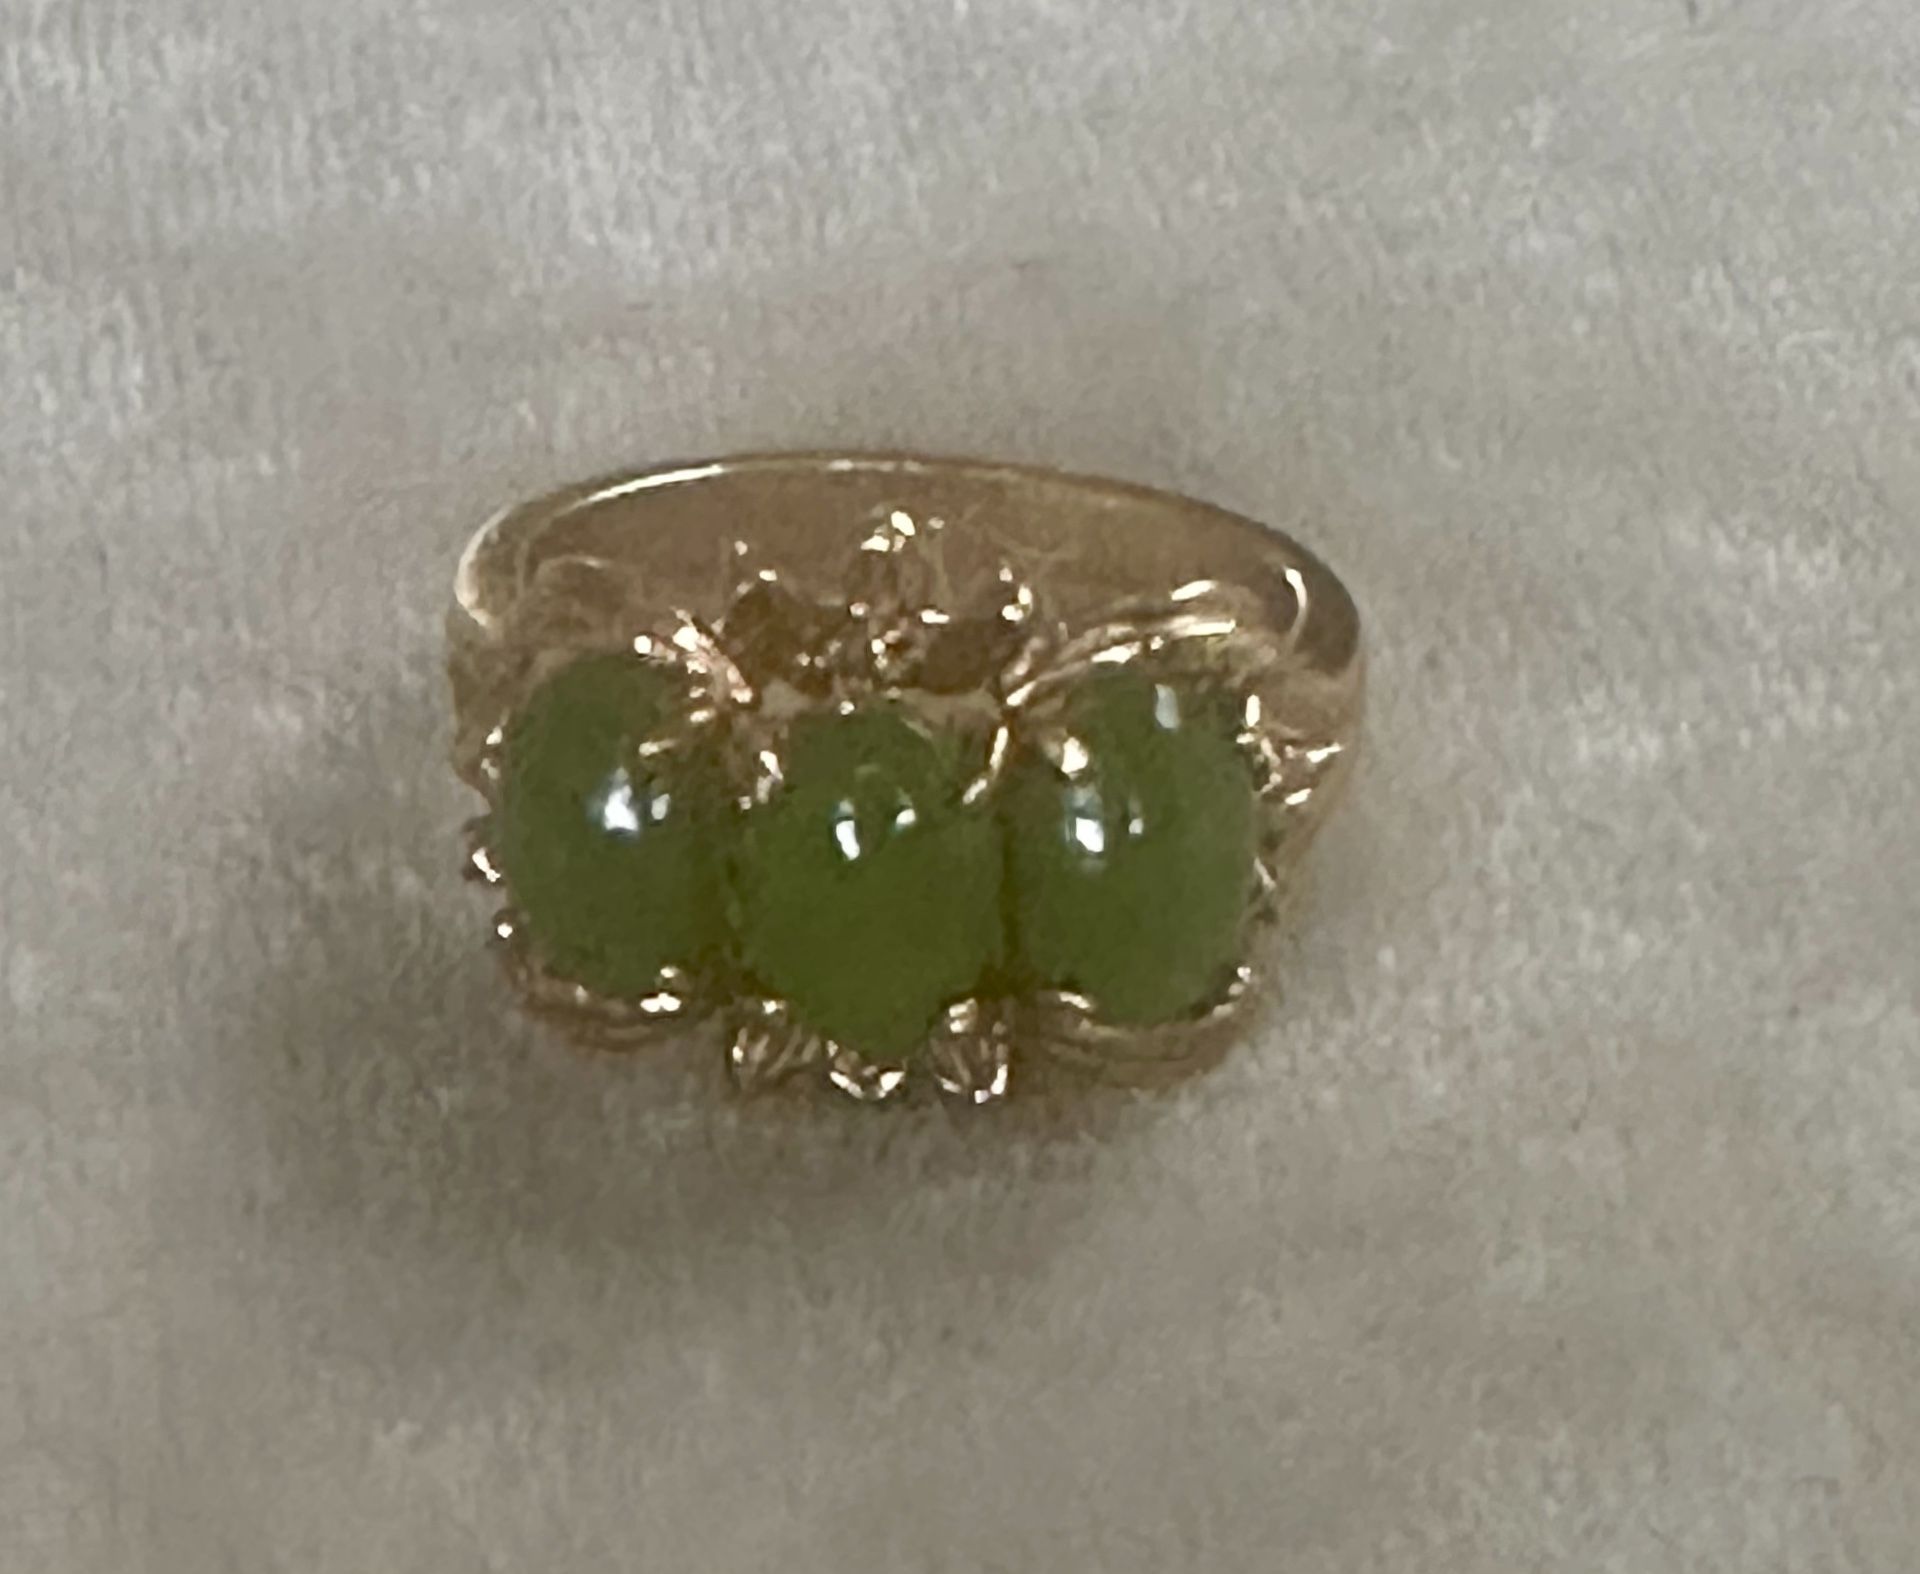 Vintage Women’s Gold Plated, Jade Ring Size 5 3/4, Beautiful Condition 